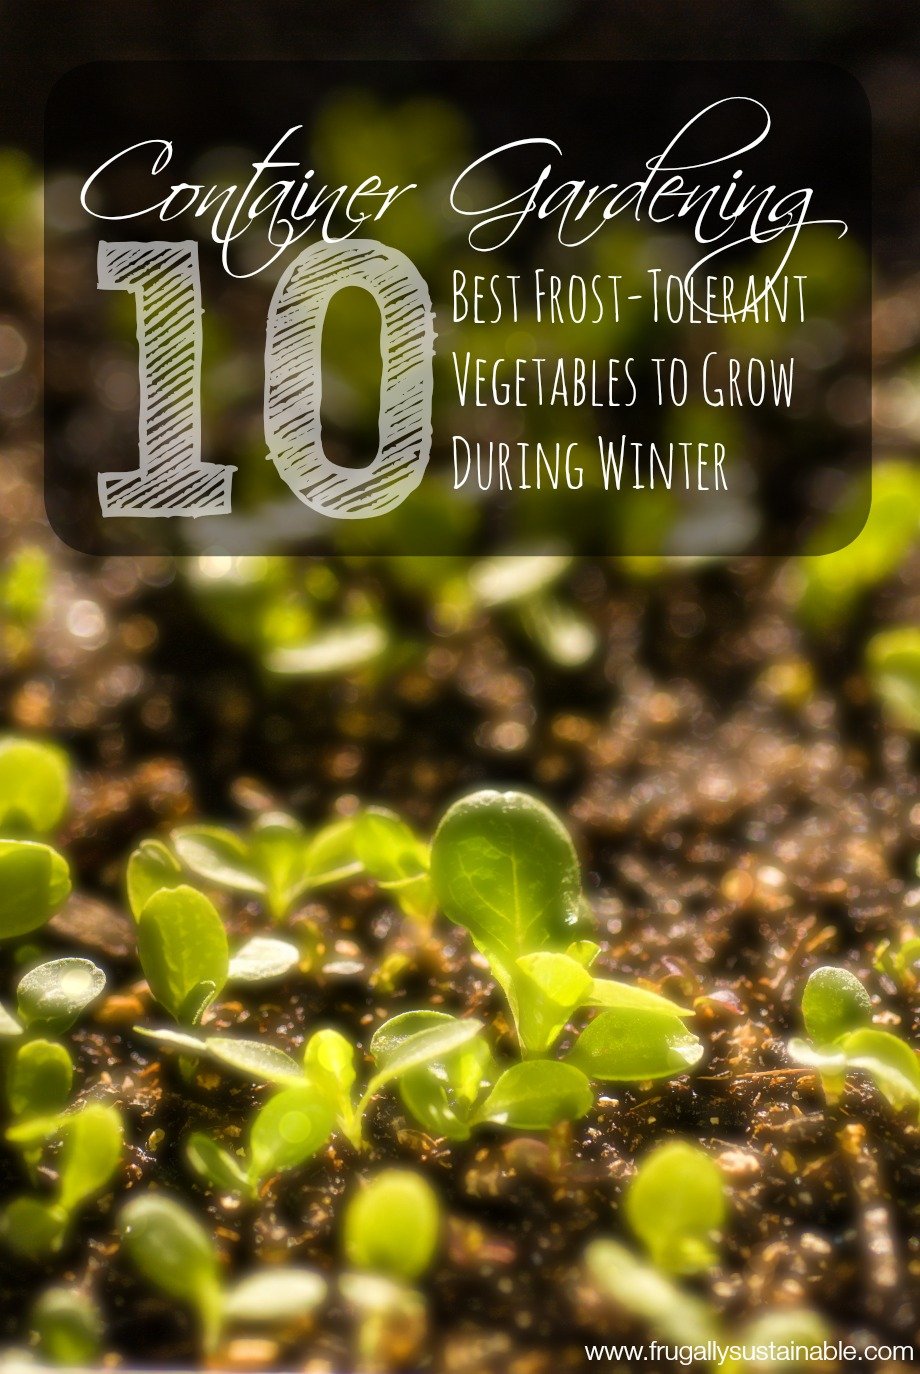 The 10 BEST vegetables to grow in pots during winter